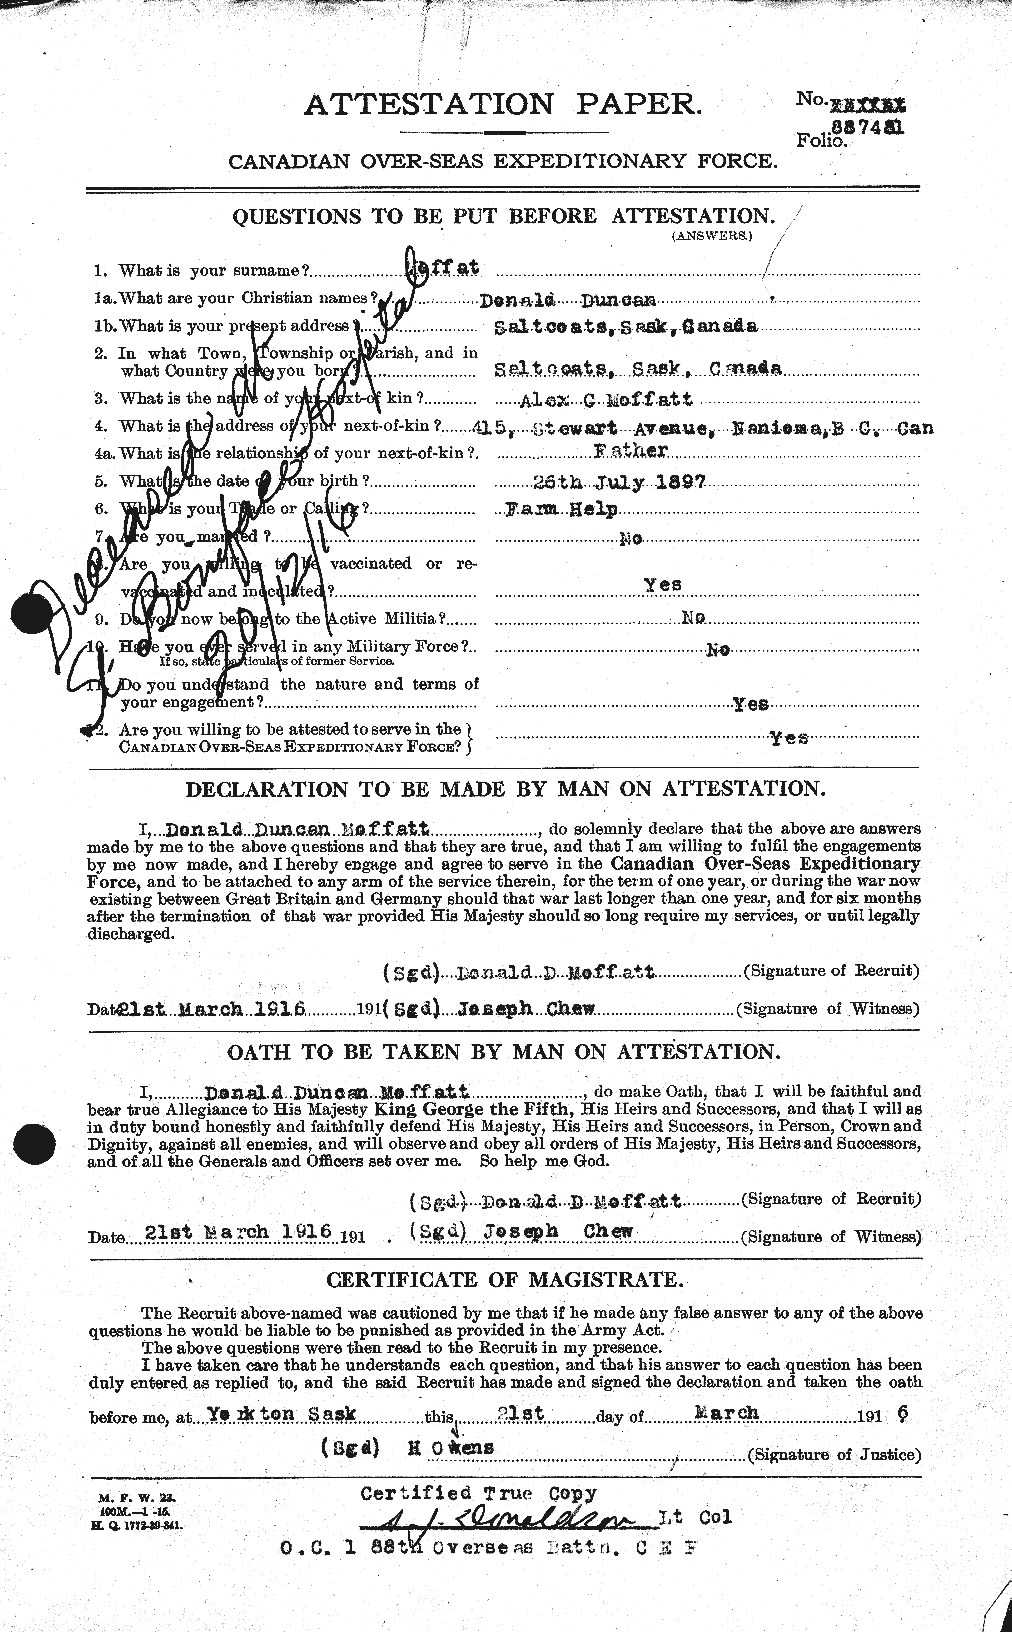 Personnel Records of the First World War - CEF 499004a